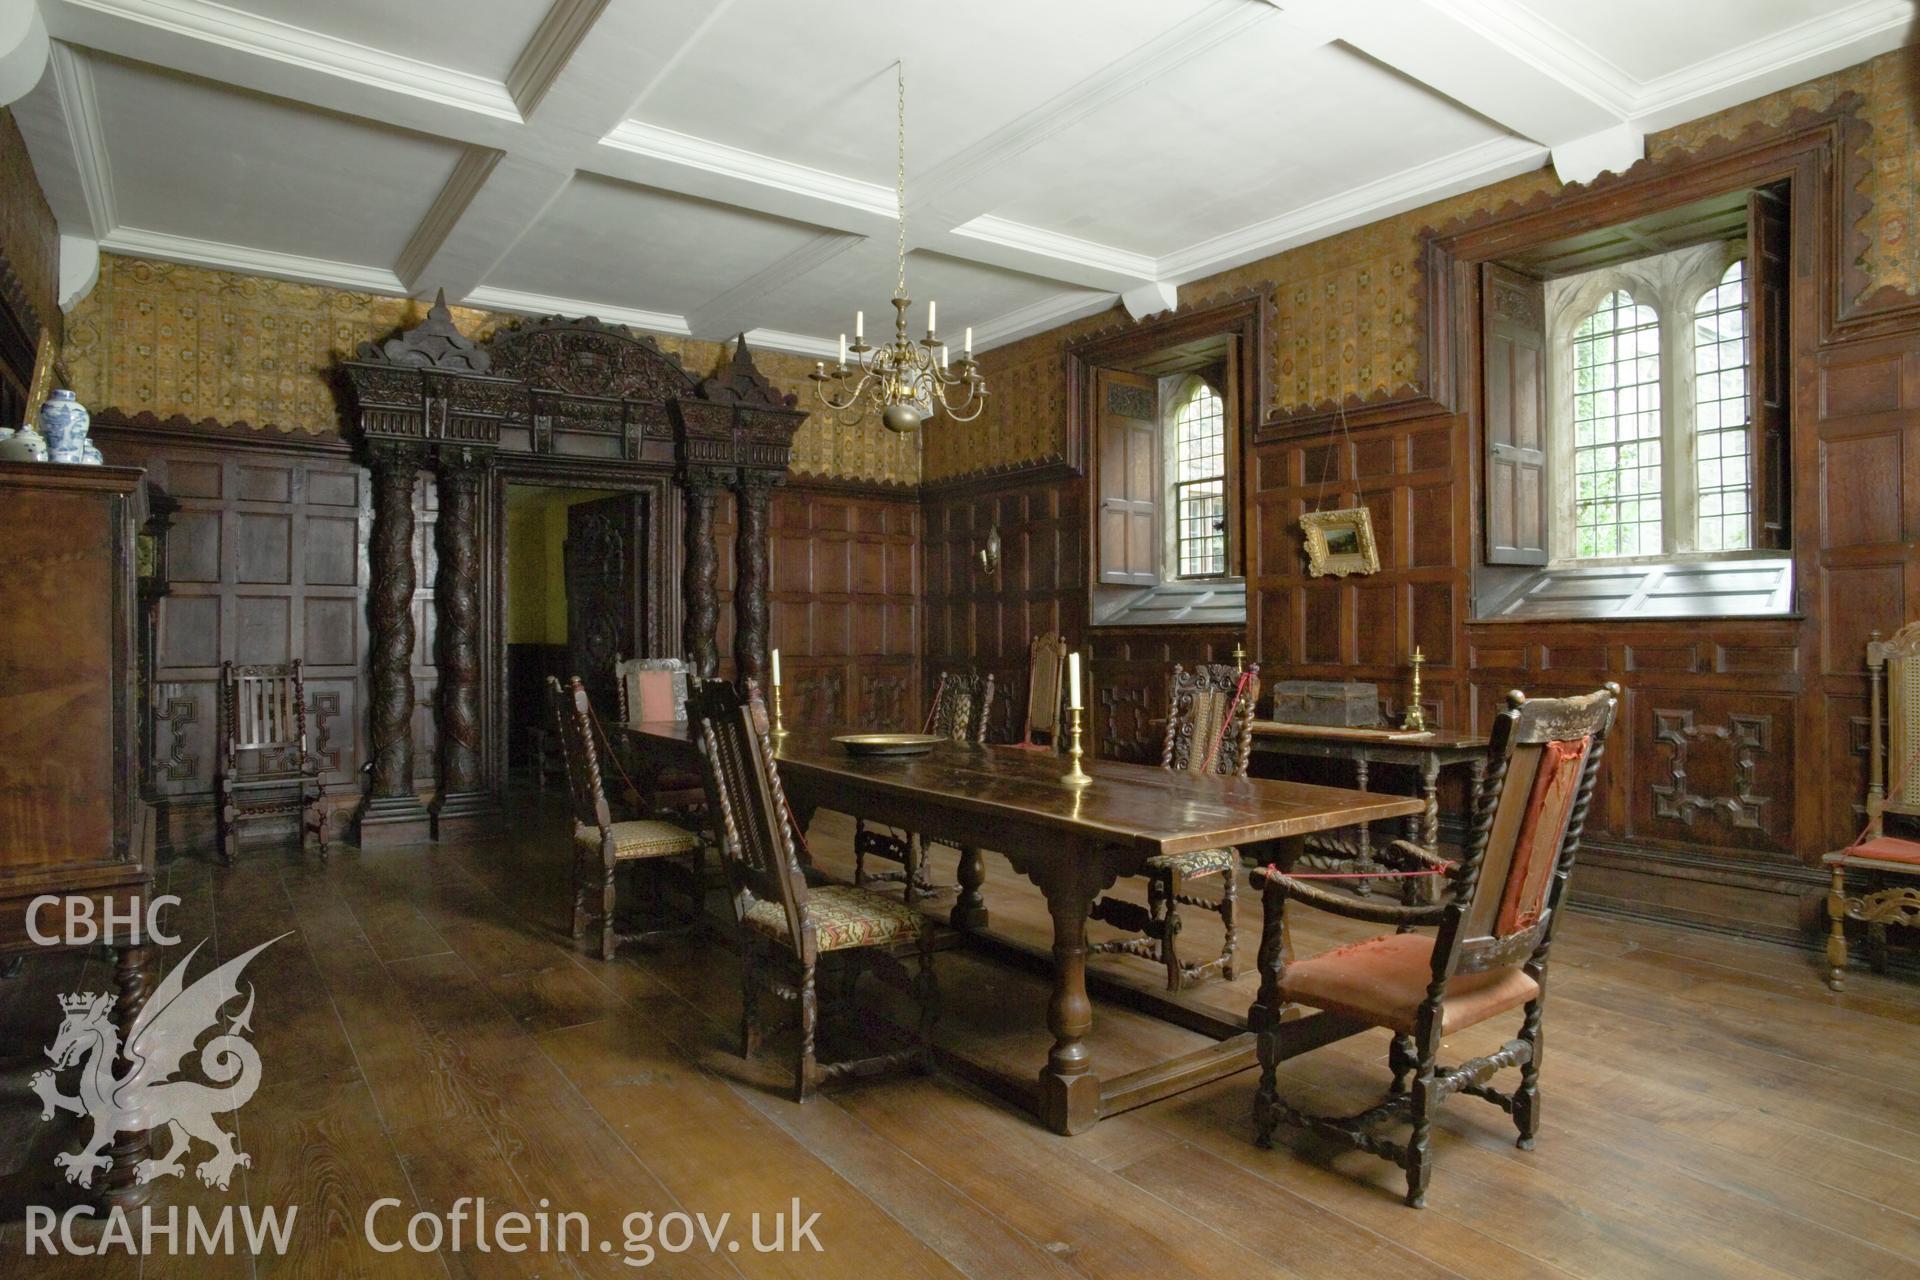 The panelled room.